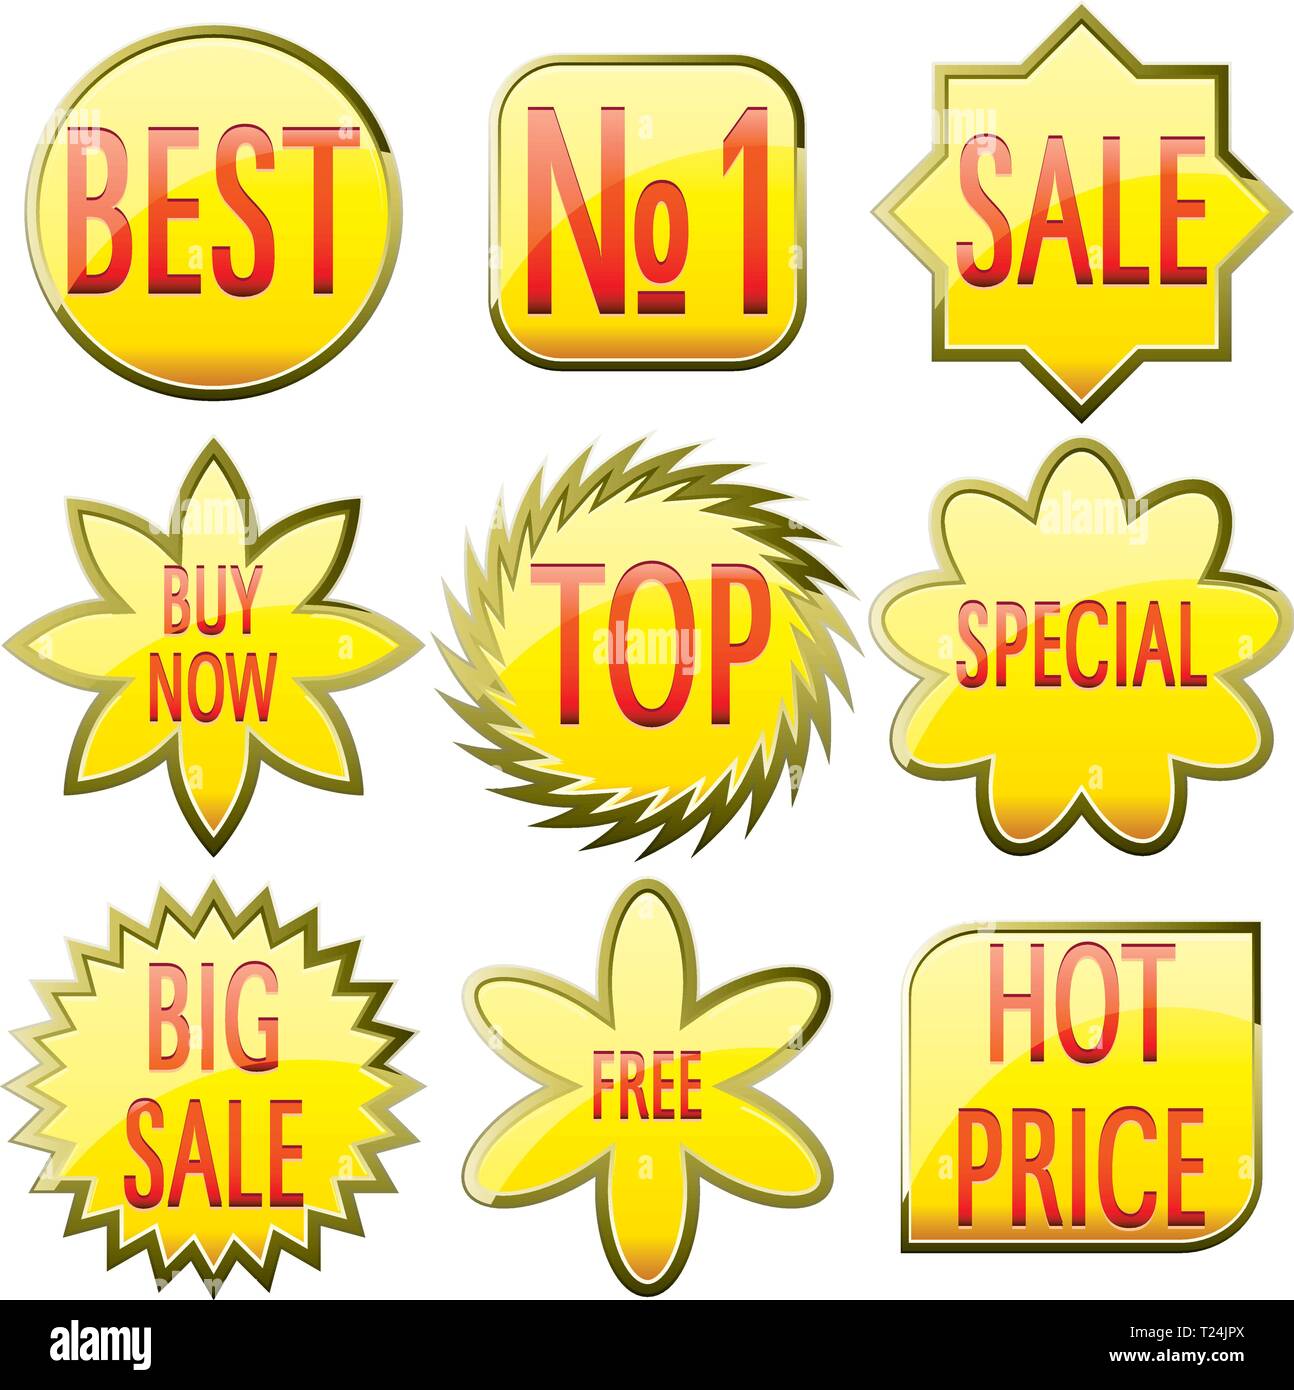 Set of shiny yellow glass sale buttons with red text, vector illustration Stock Vector